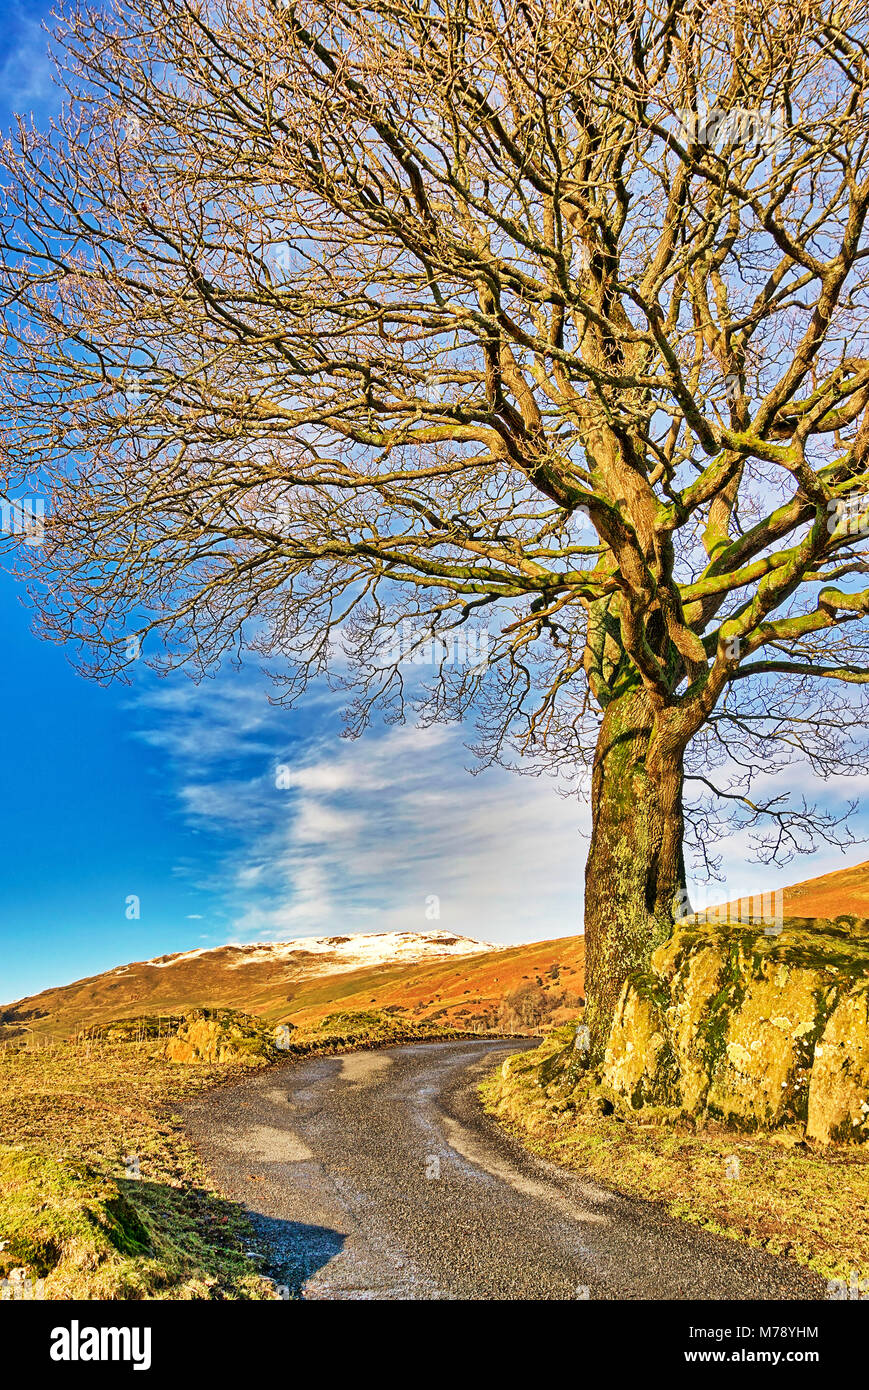 A winding country road passing a lone Winter tree with a snow ca Stock Photo